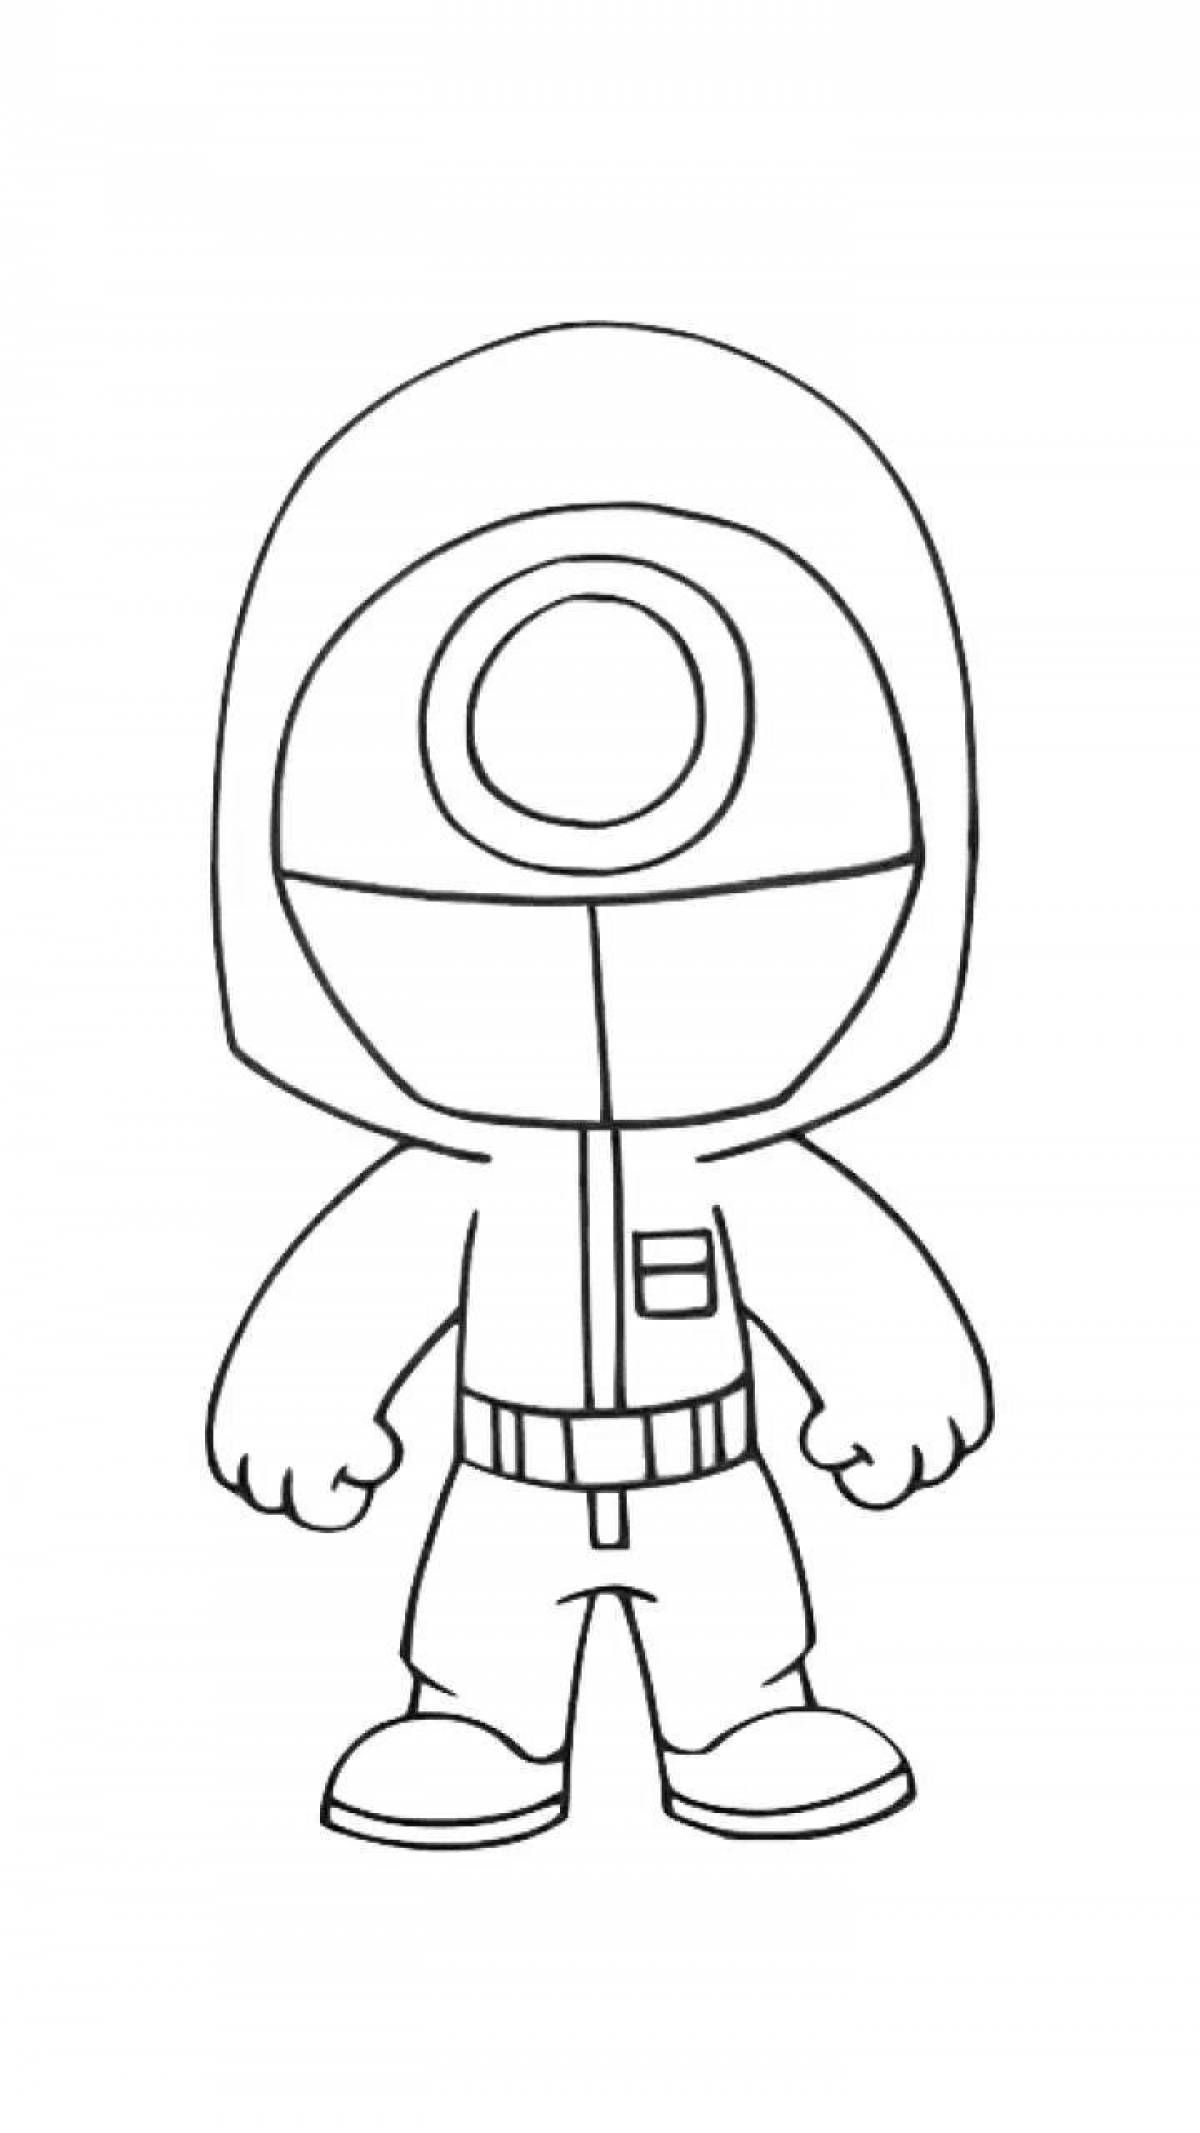 Adorable squid doll coloring book